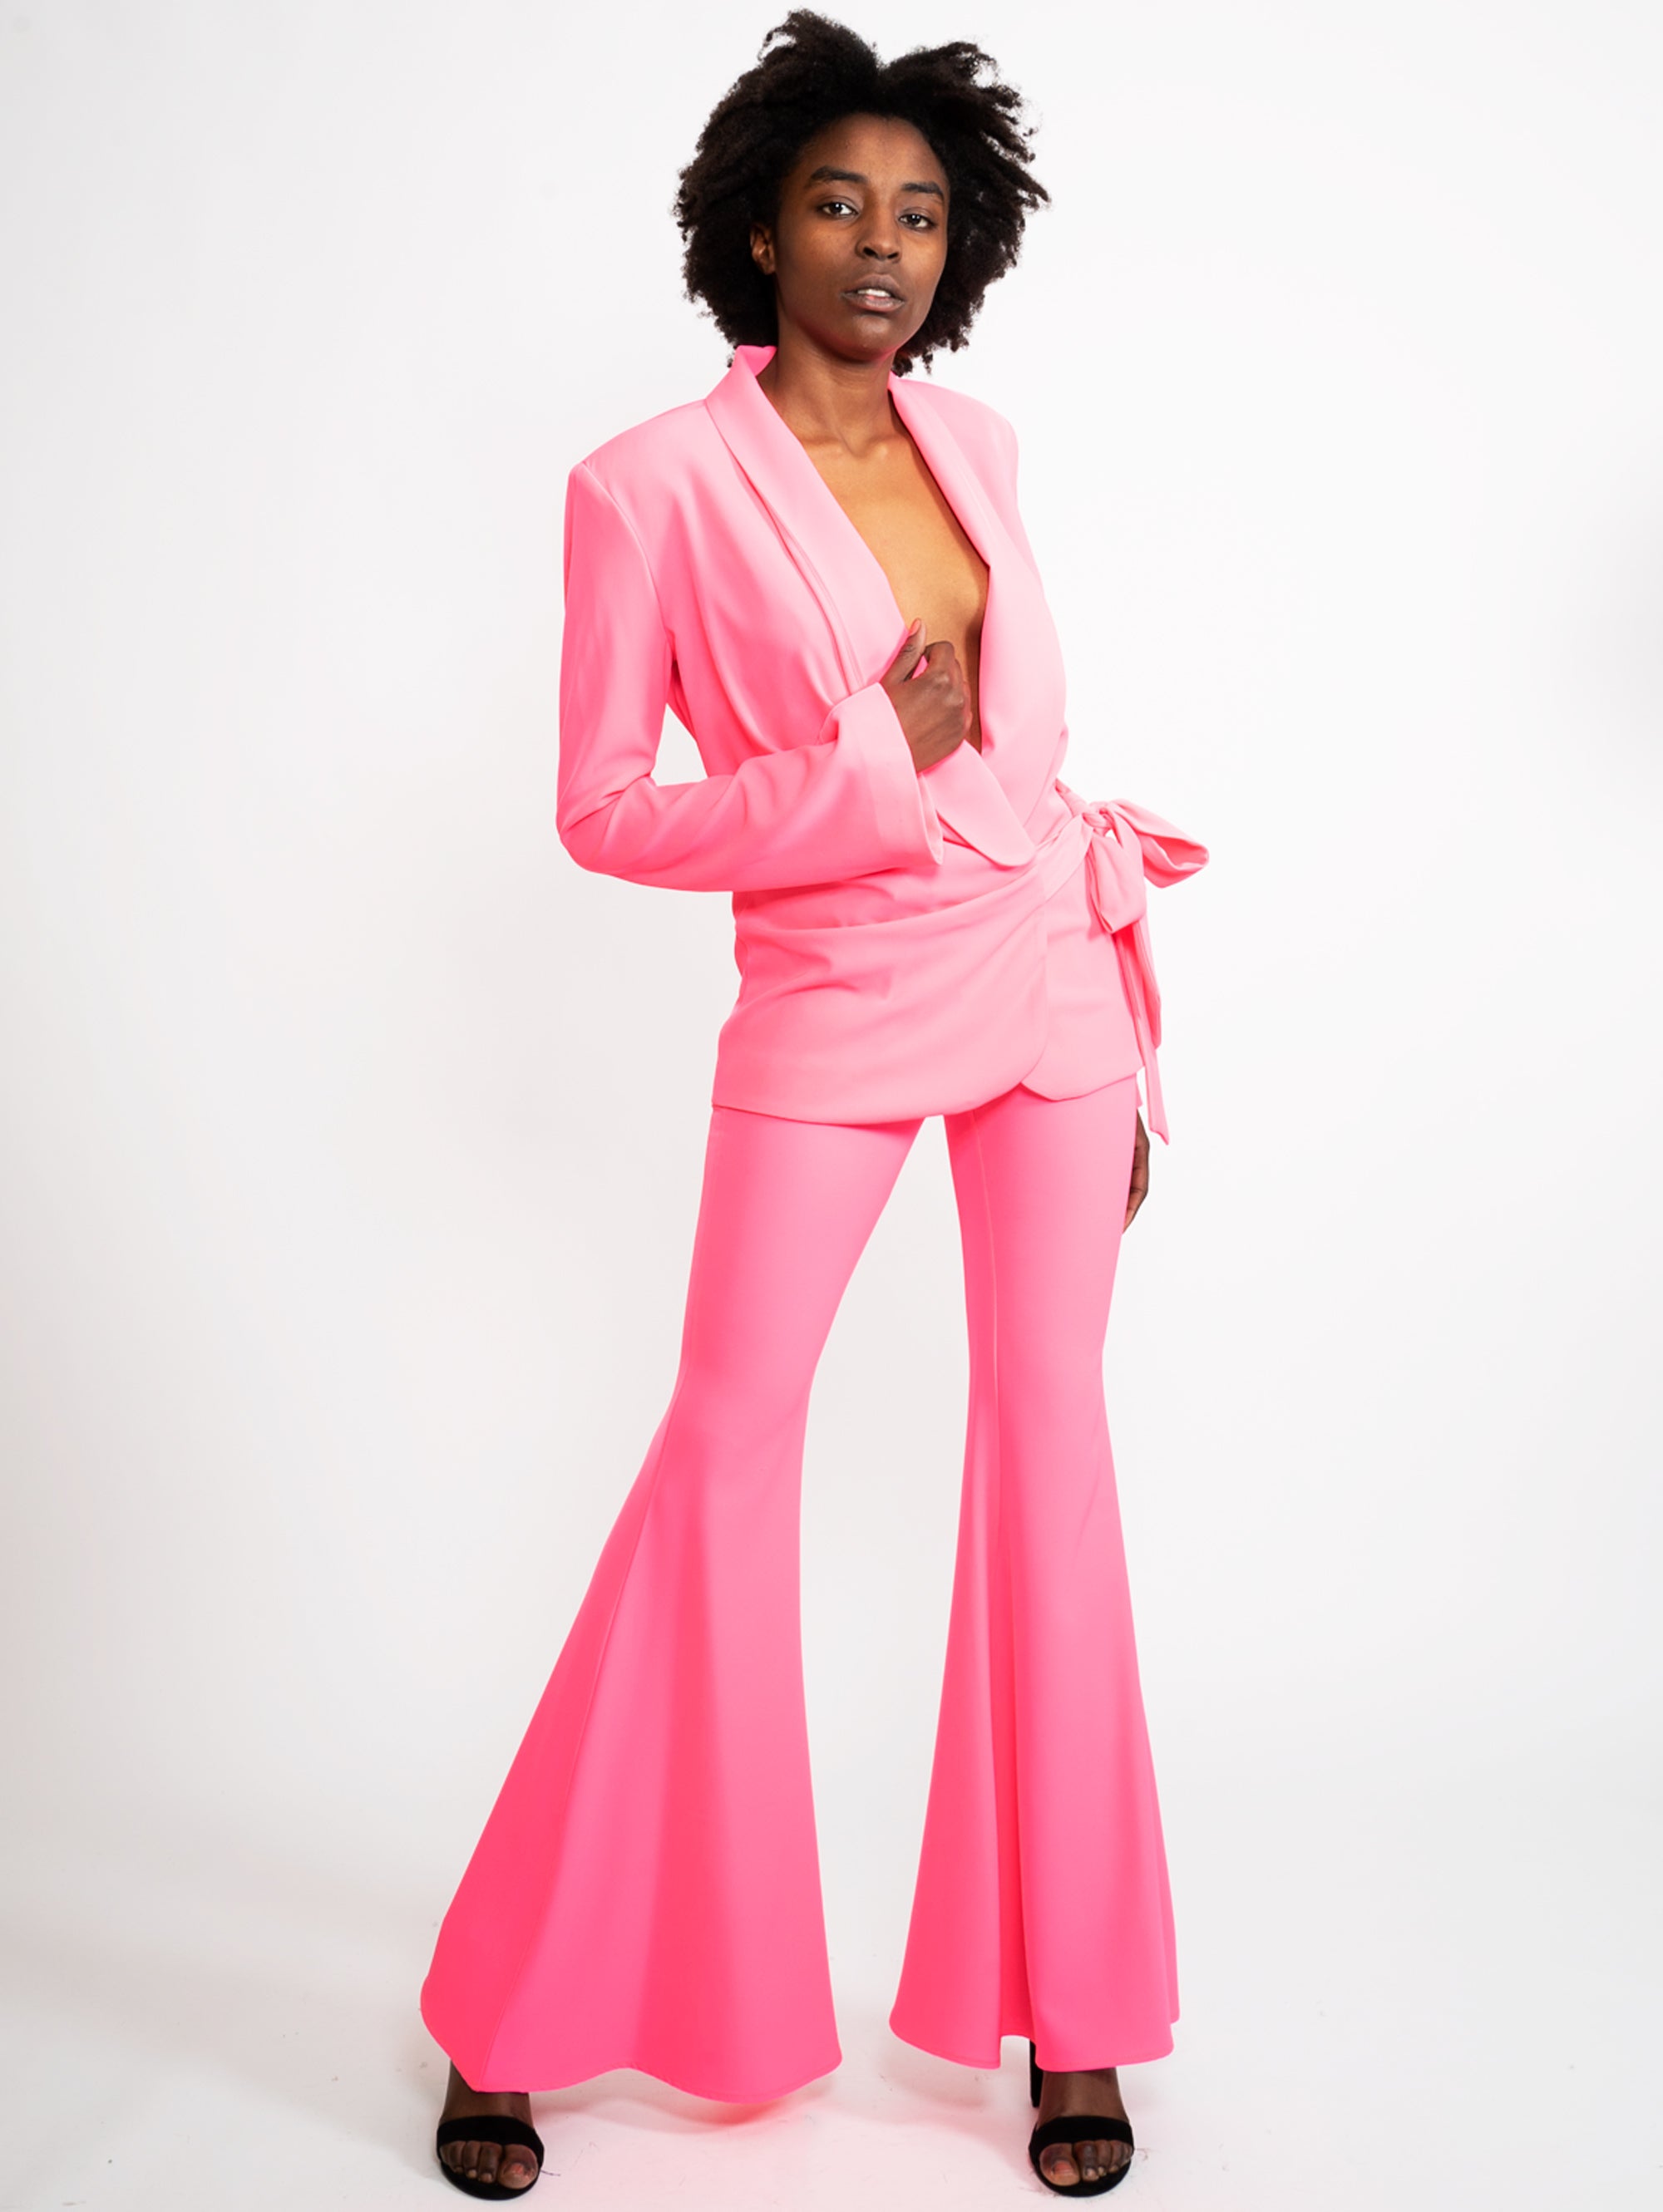 Fluo Pink Blazer with Side Closure